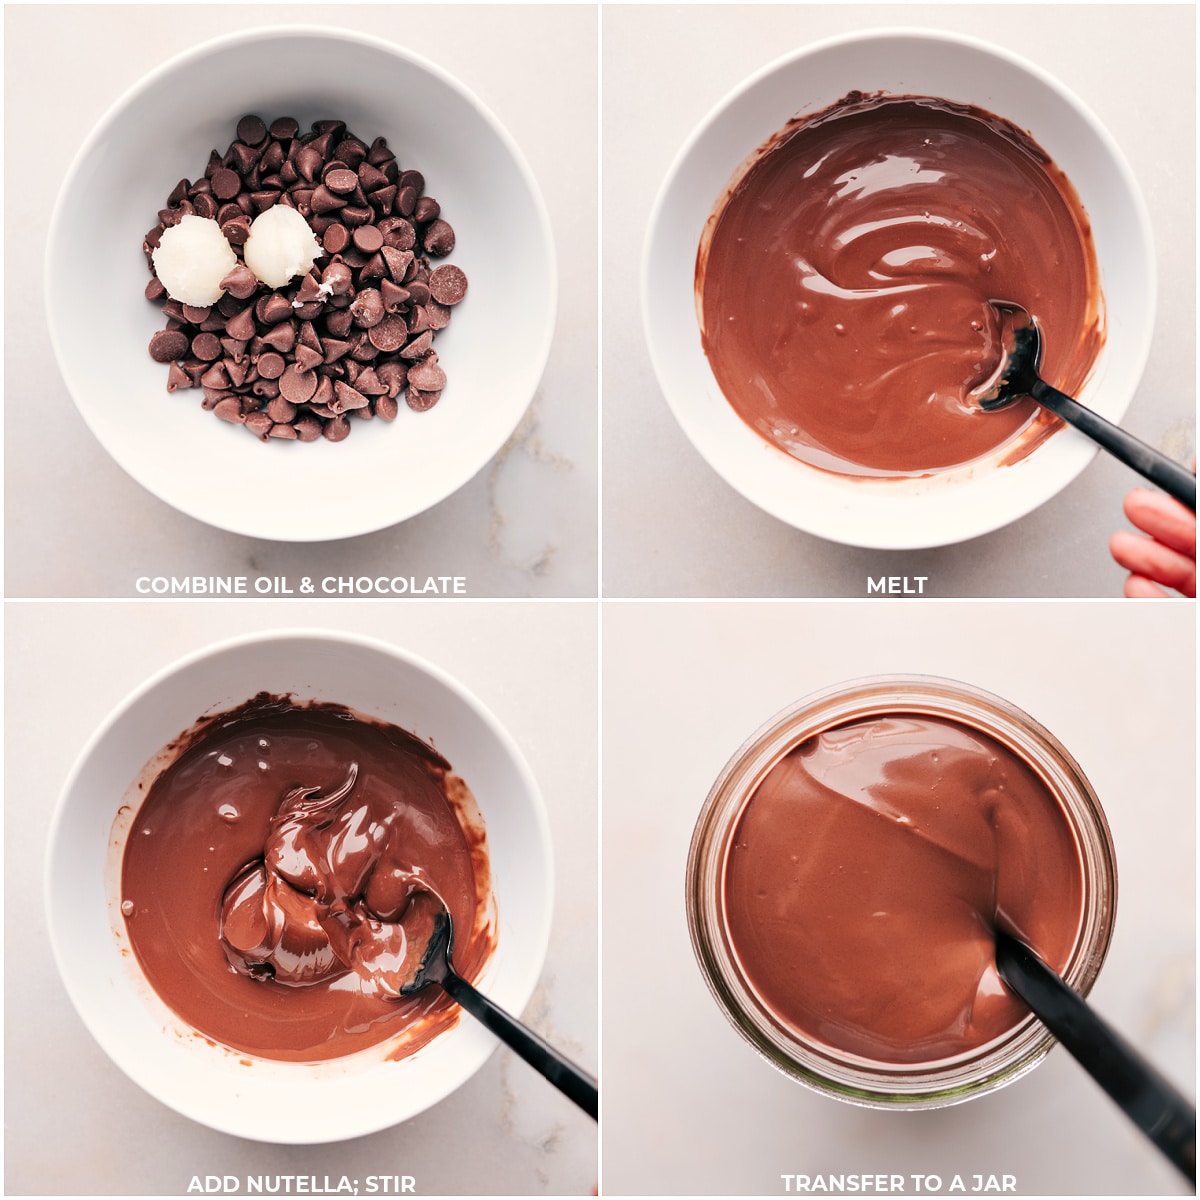 Chocolate chips melting, transforming from solid morsels to a smooth, glossy liquid.